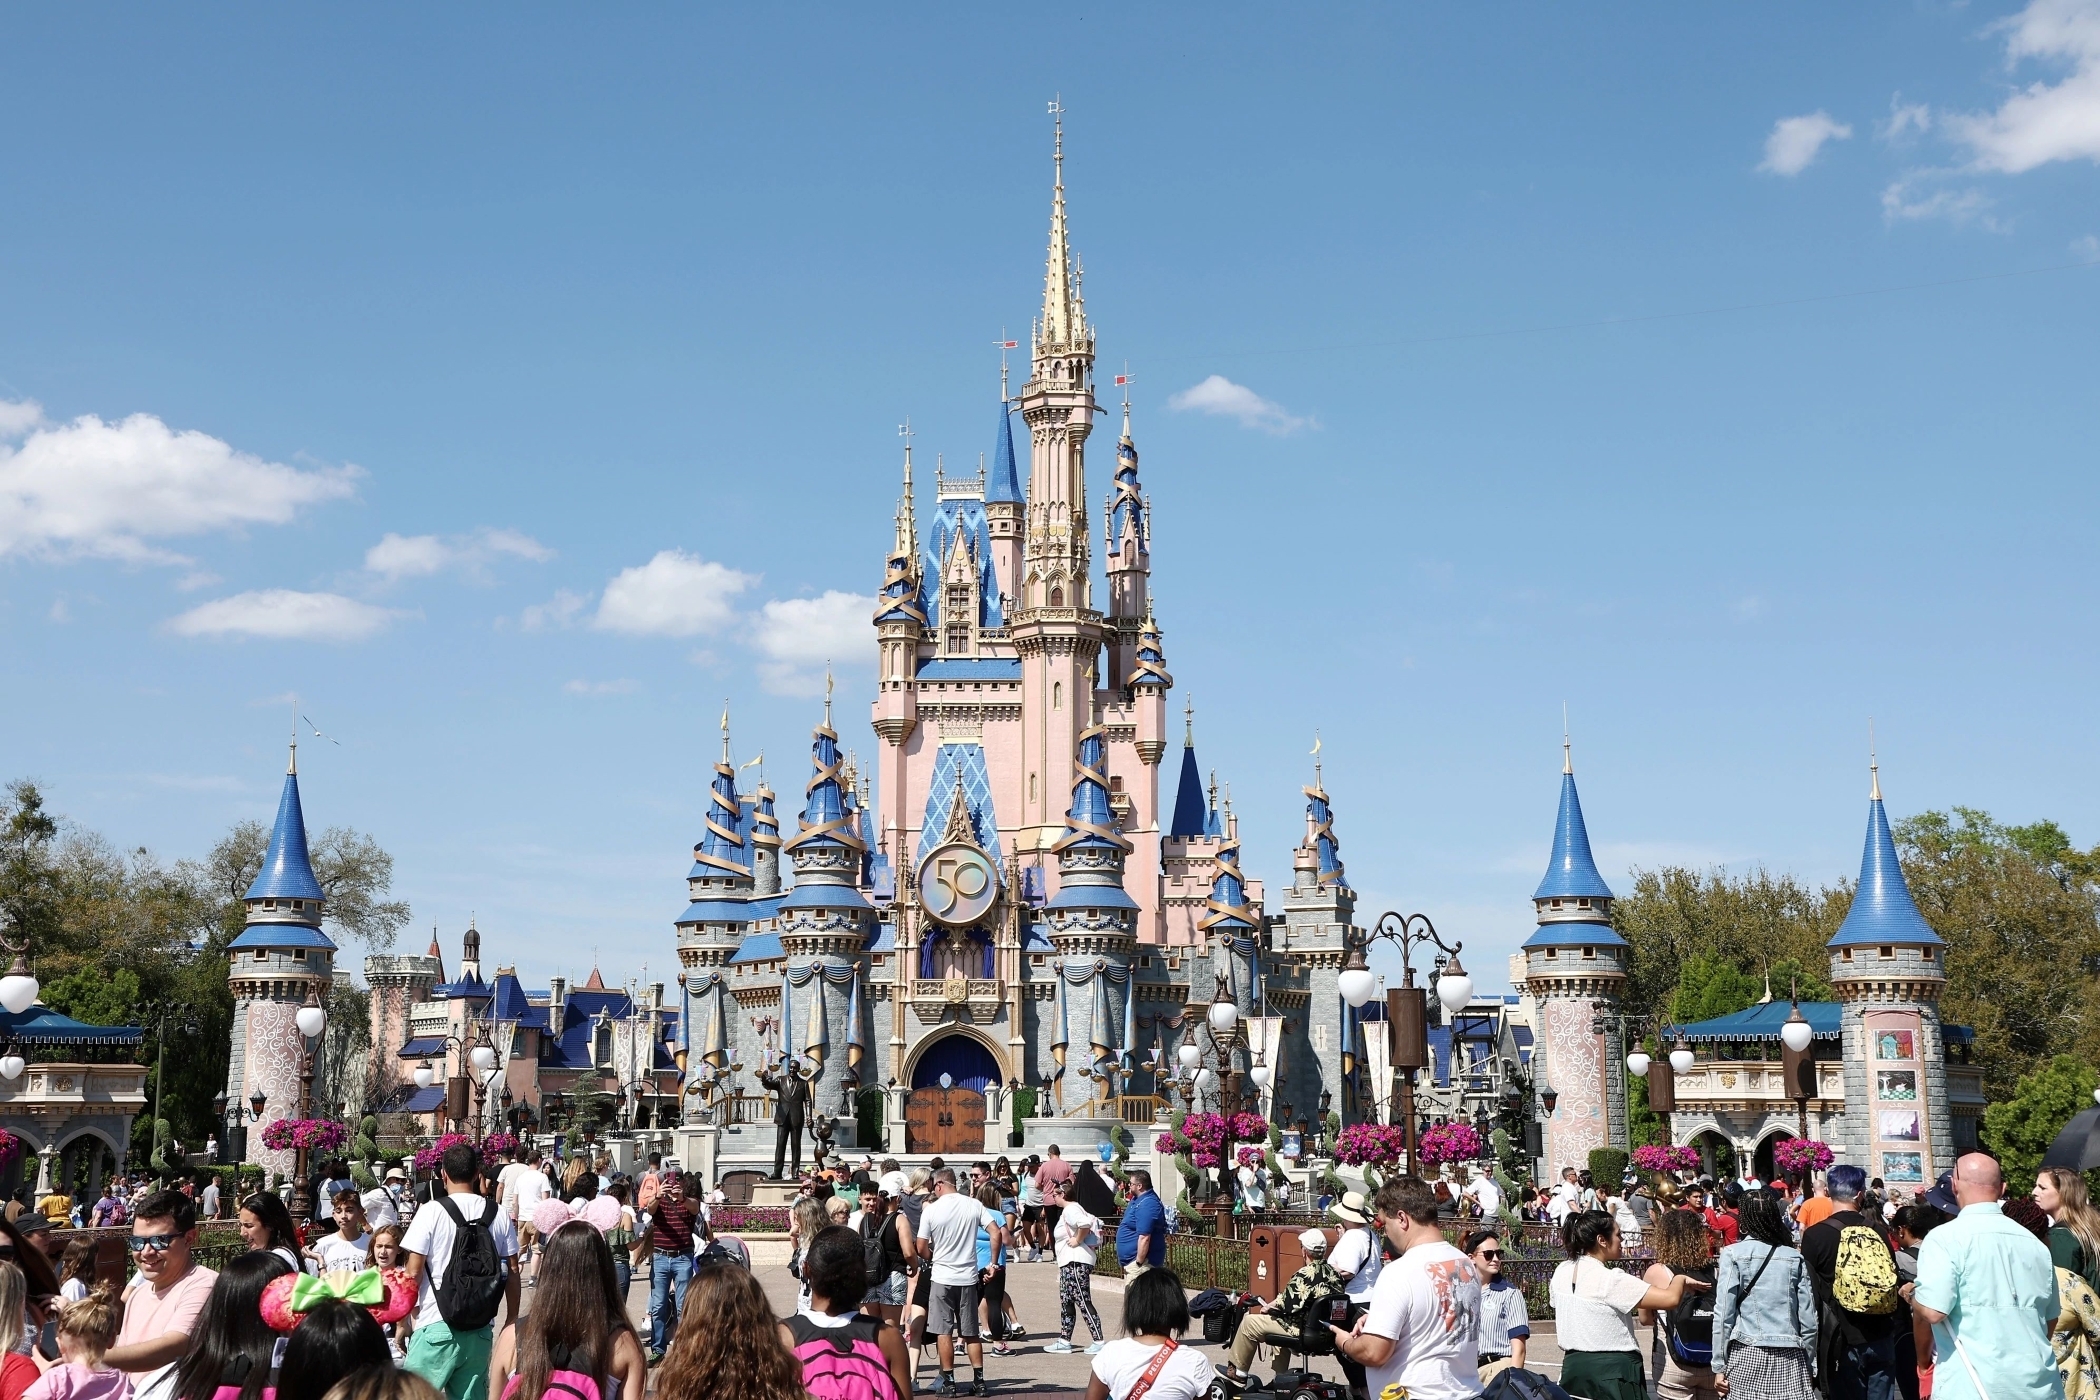 Parks including Walt Disney World near Orlando, Florida are among relative bright spots for Disney, which announced significant cost cuts amid streaming and other media-related challenges. (Getty Images)